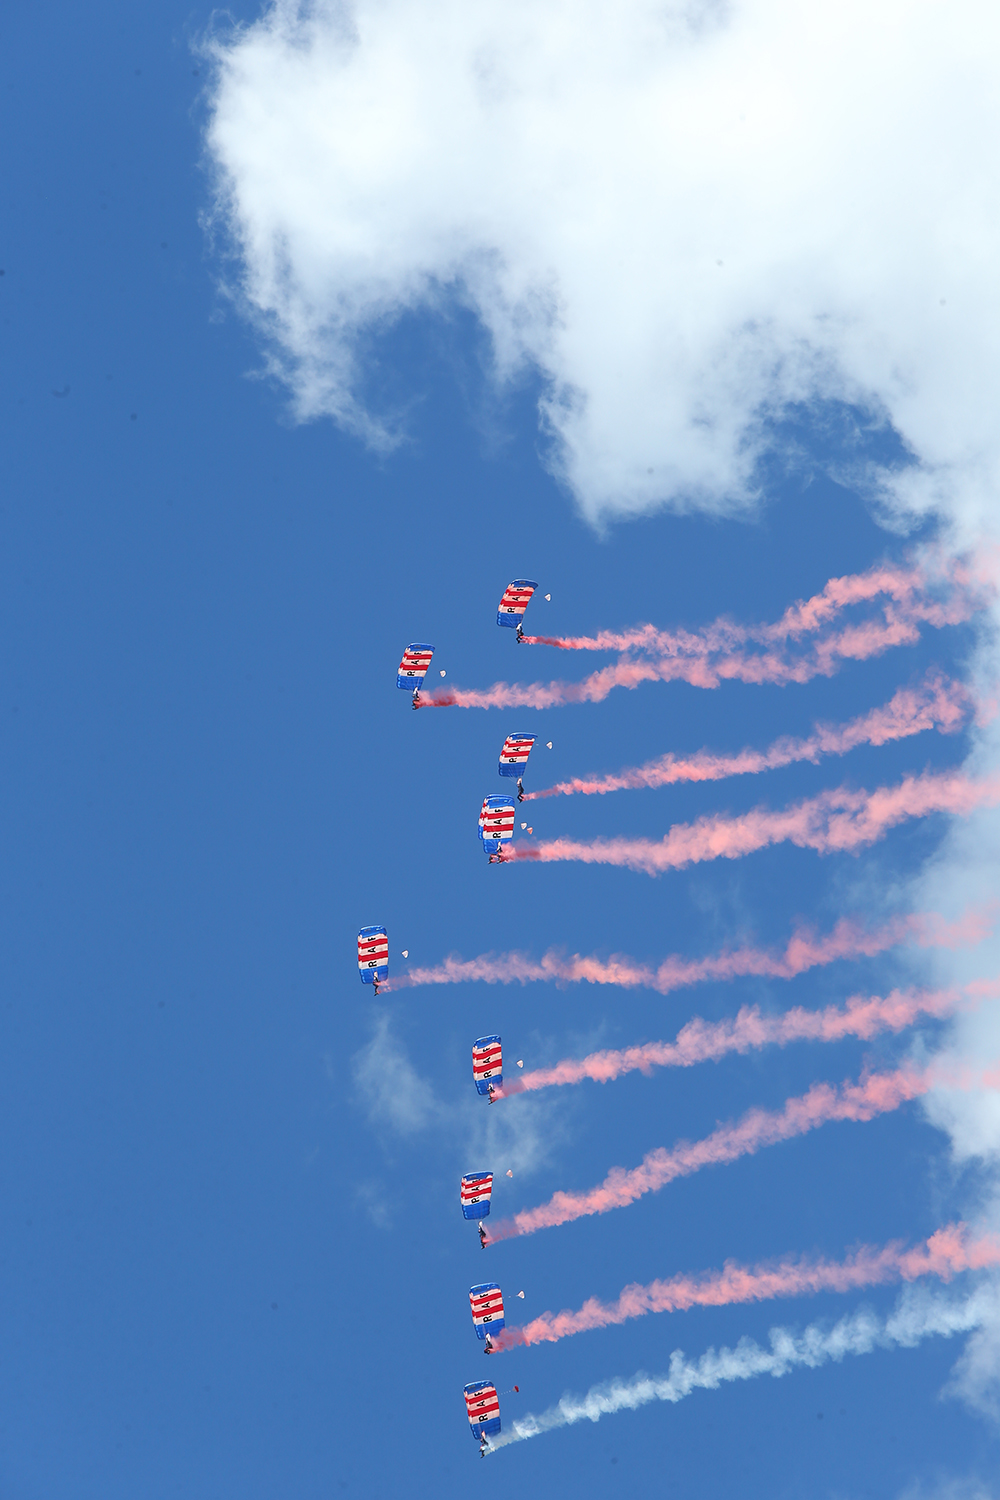 The RAF Falcons perform at the 134th Lincolnshire Show